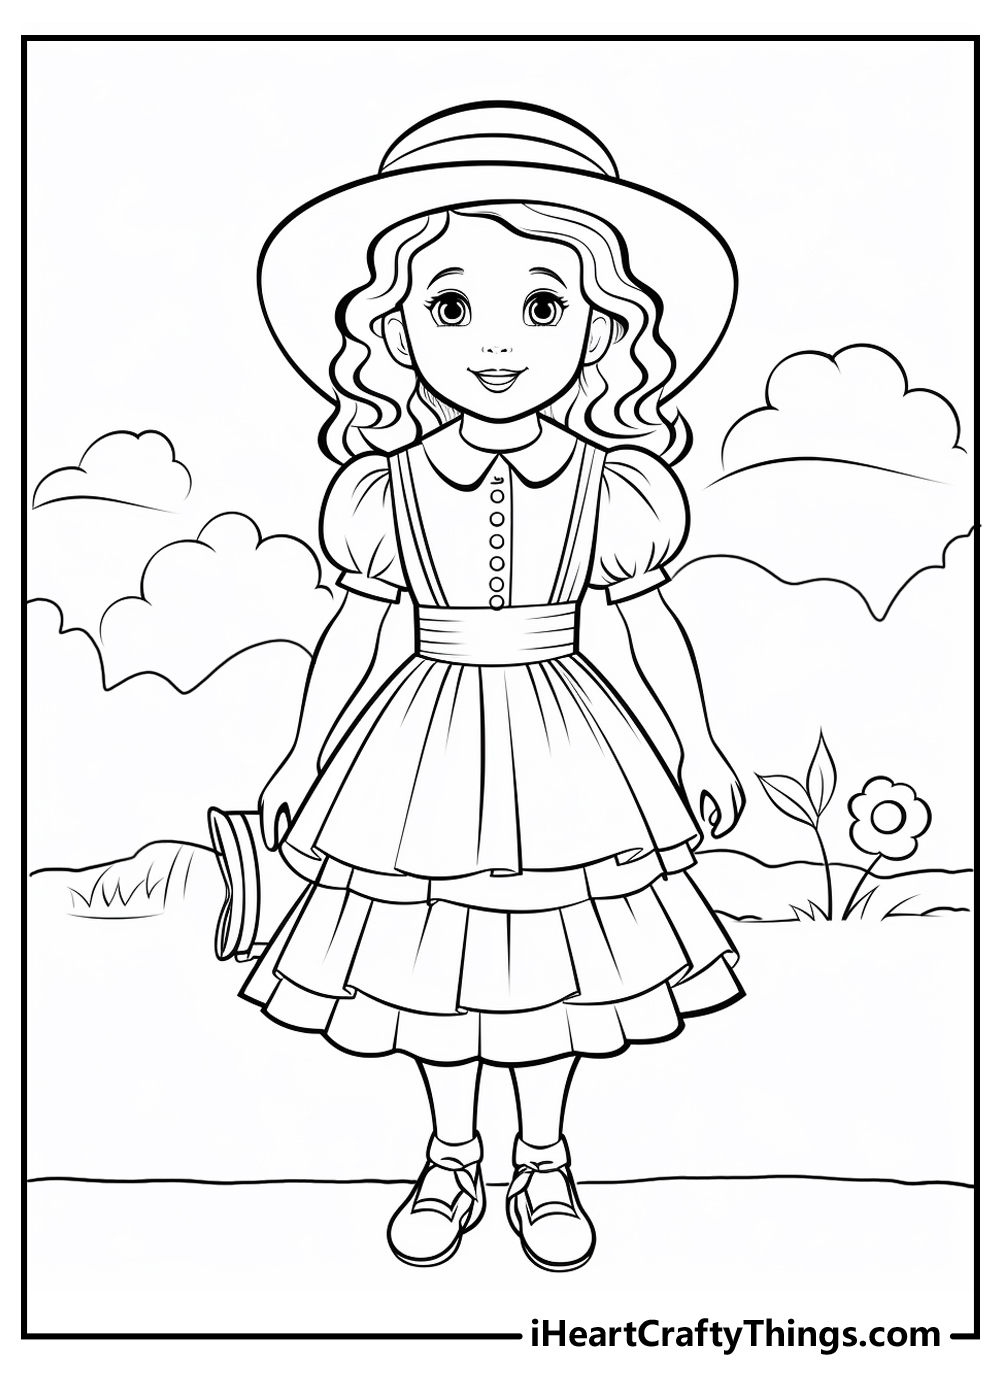 new wizard of Oz coloring sheet free download